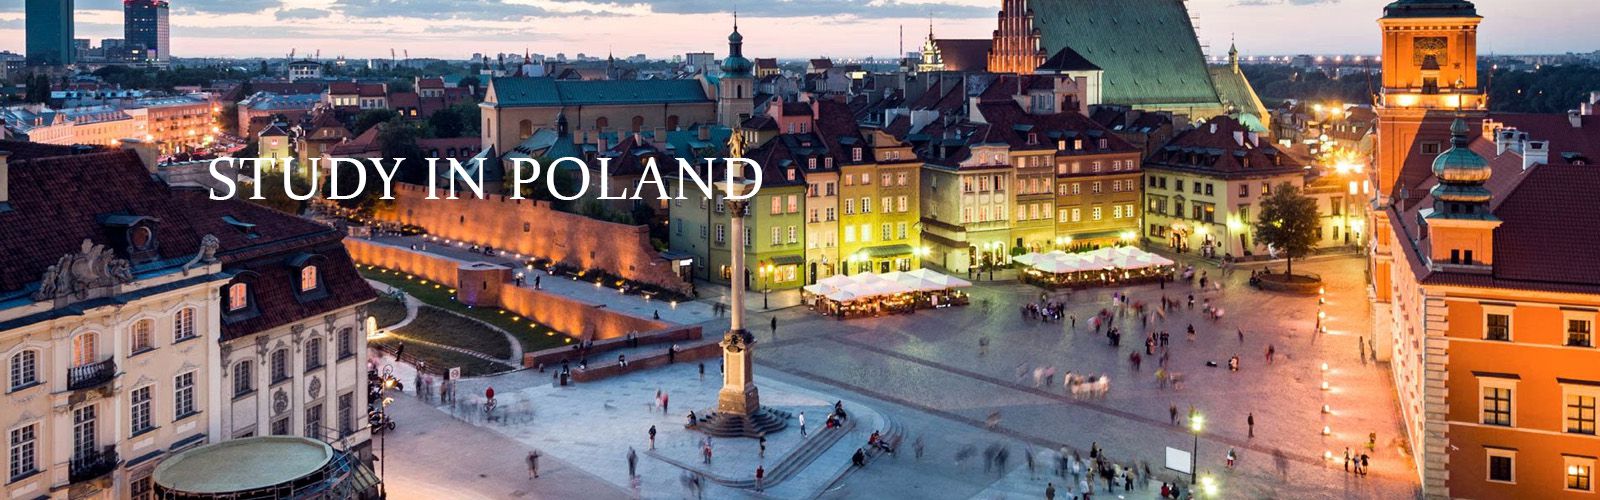 Study In Poland Education Consultants In Amritsar, Punjab & Chandigarh